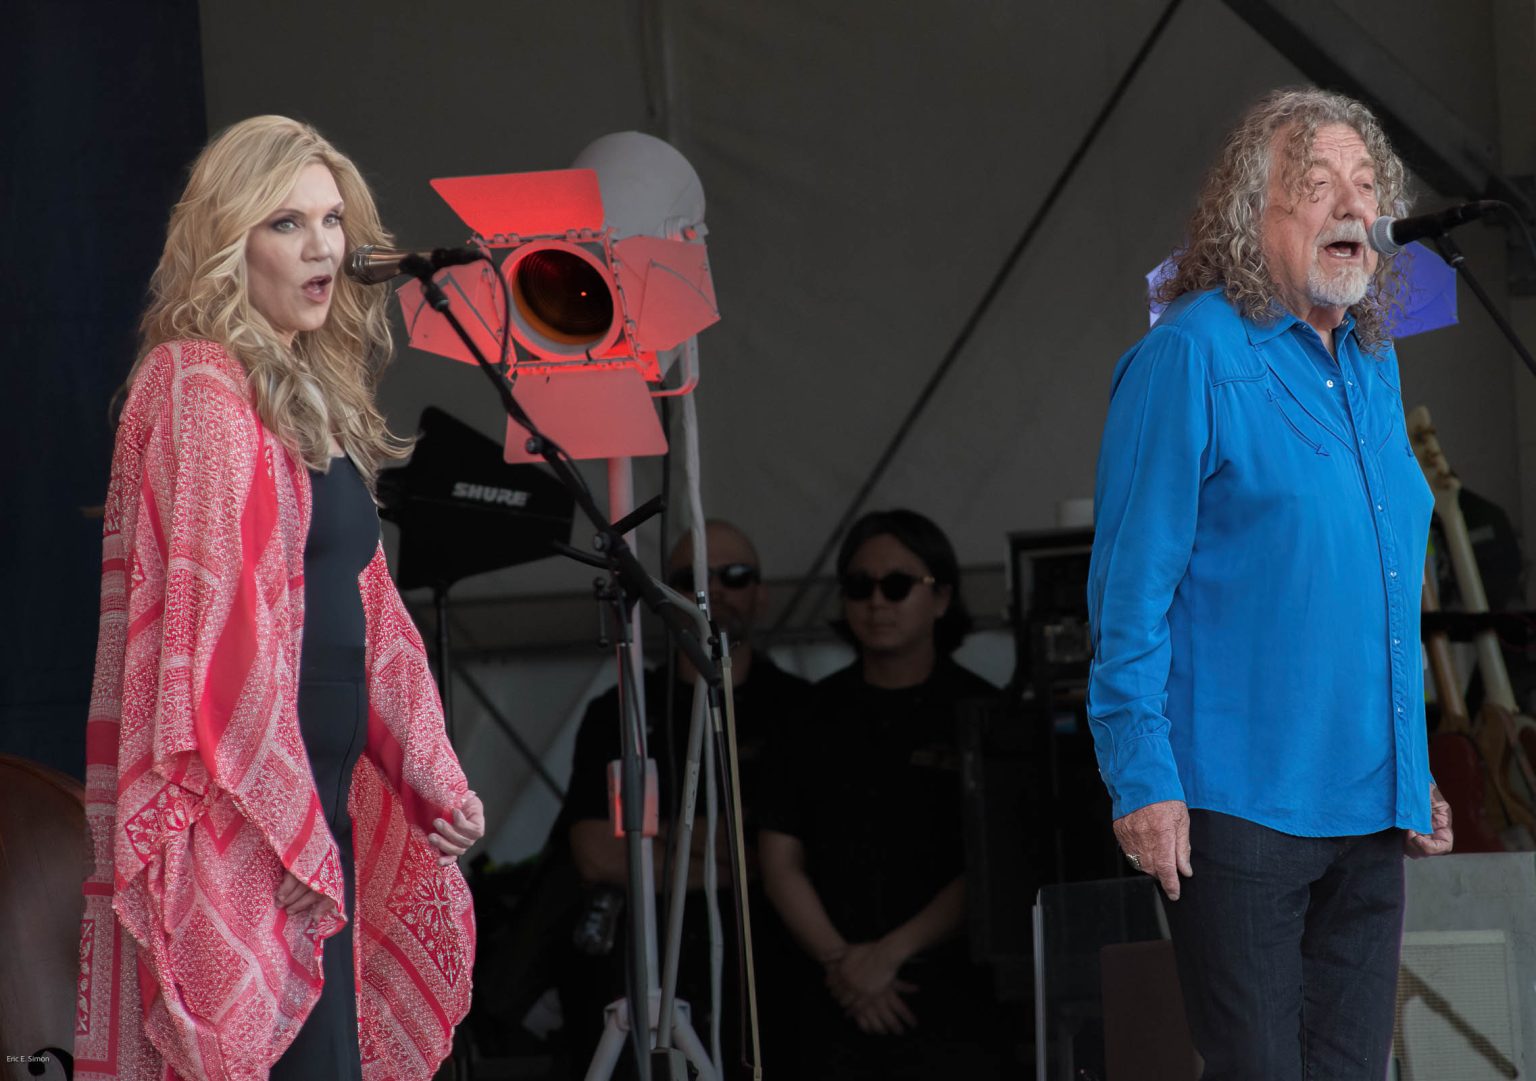 2023 New Orleans Jazz and Heritage Festival, Jazz Fest, Robert Plant and Alison Krauss